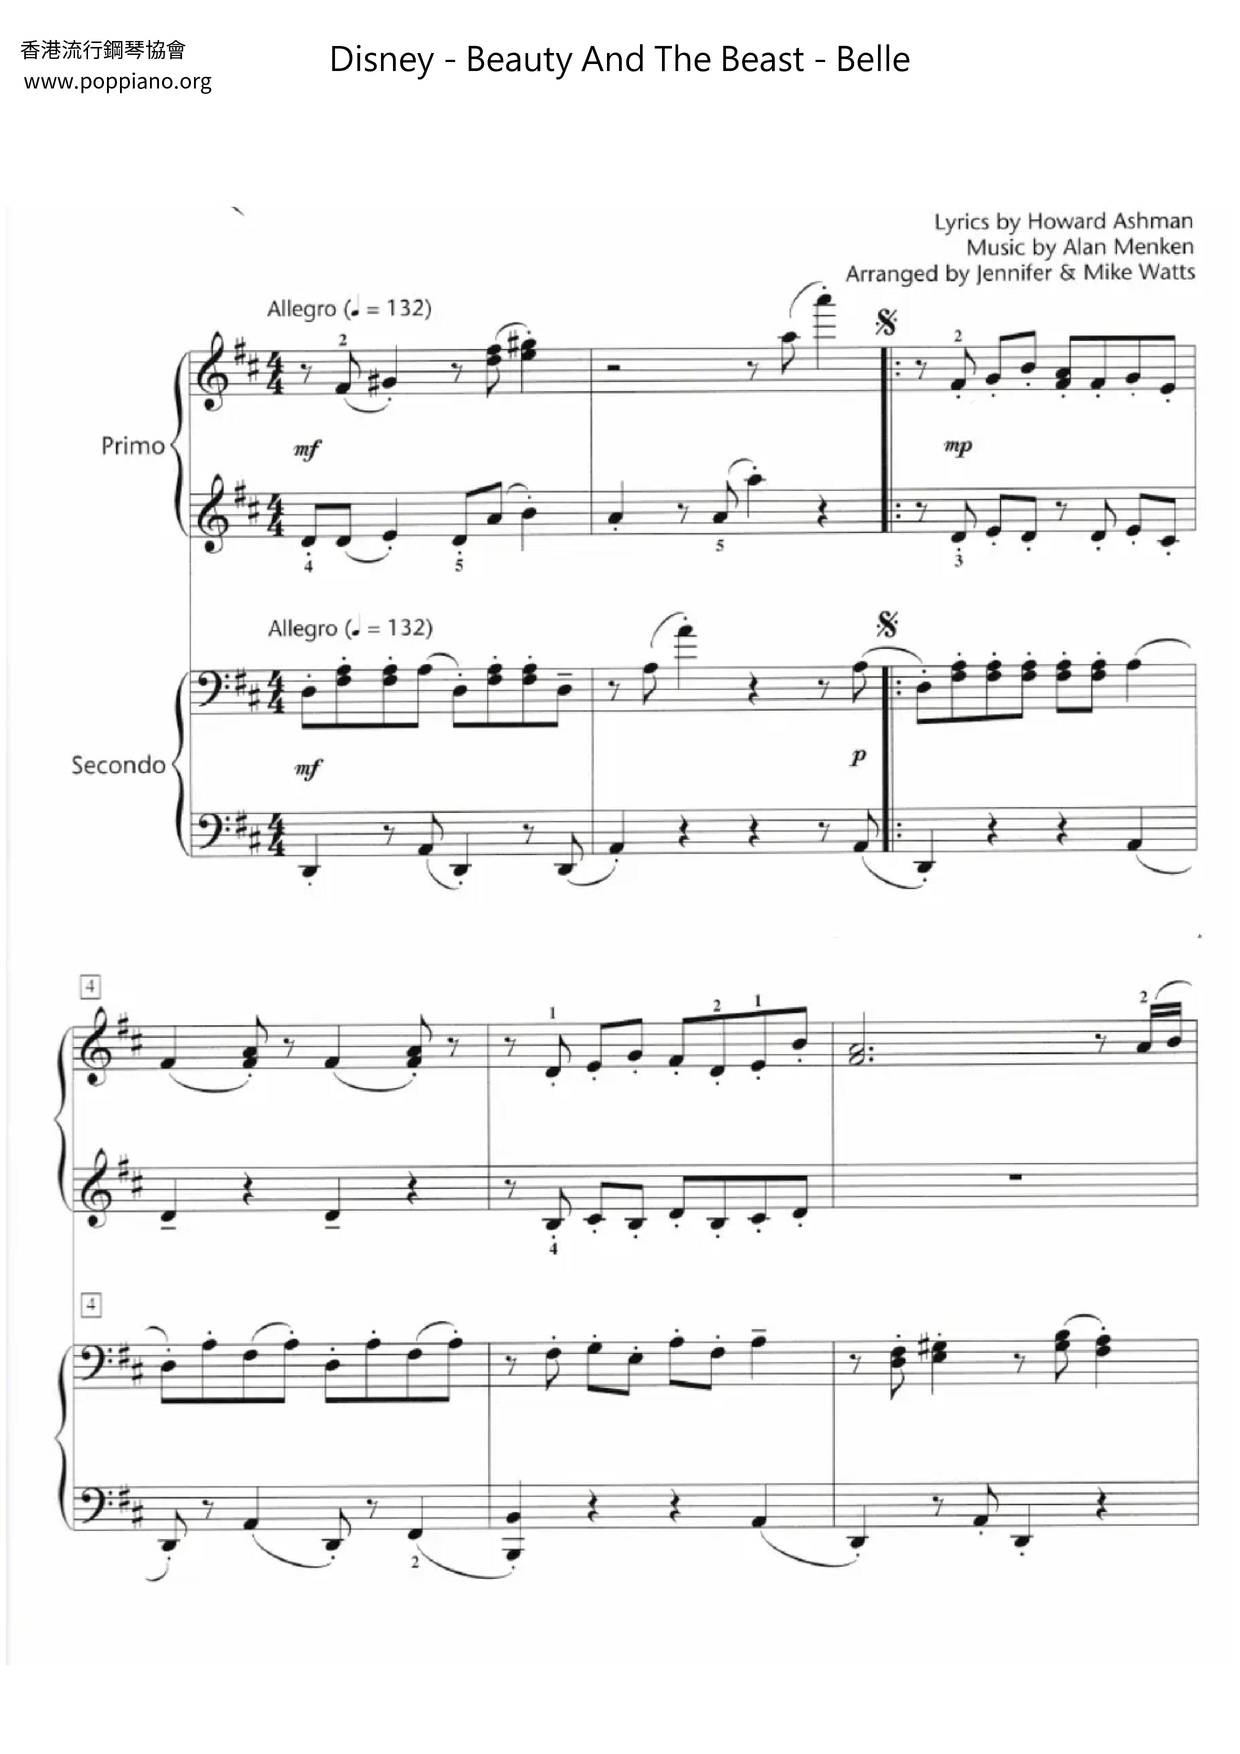 Beauty And The Beast - Belle Score